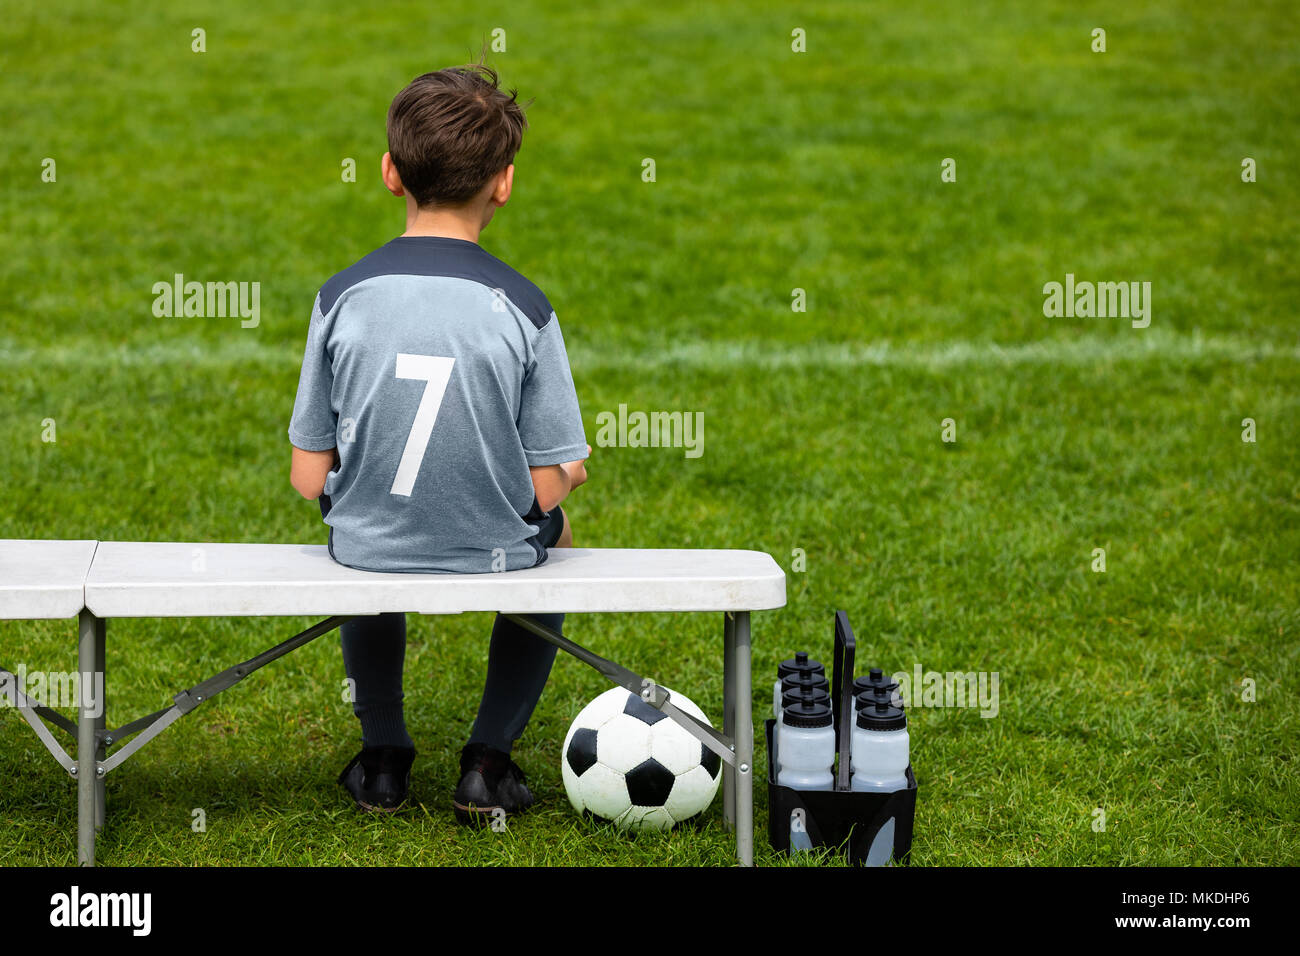 Little footballer sitting on a wooden bench and watching soccer game. Young substitute player waiting on a soccer bench. Boy on a grass pitch with a s Stock Photo